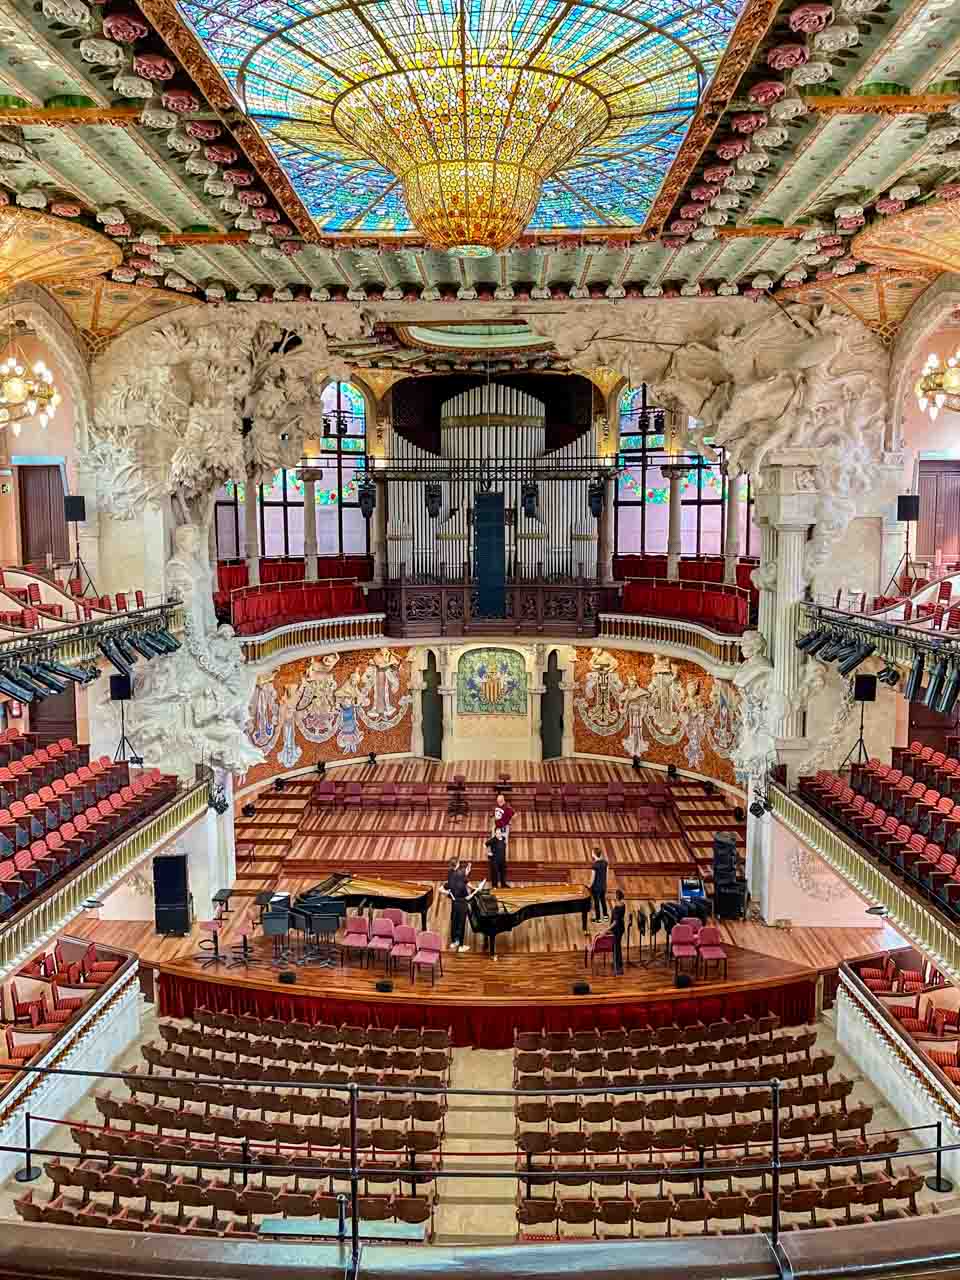 The interior of a music hall with an organ, muses on the back wall of the stage, a piona on the stage, a stained-glass ceiling, and seating on two tiers.